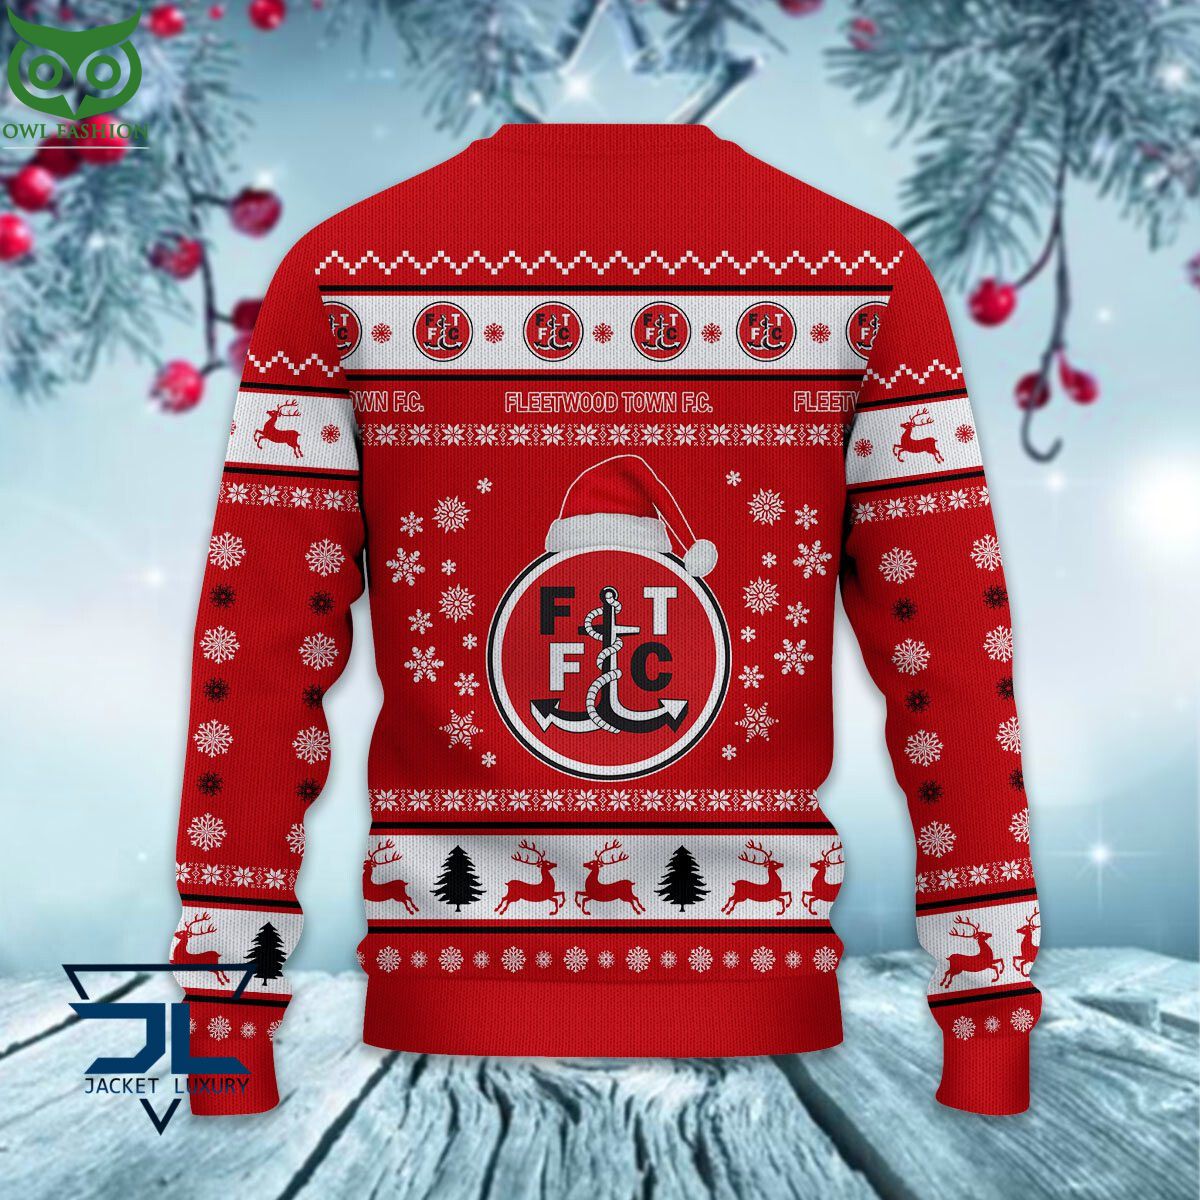 trending fleetwood town f c epl league cup new ugly sweater 3 vwCHW.jpg